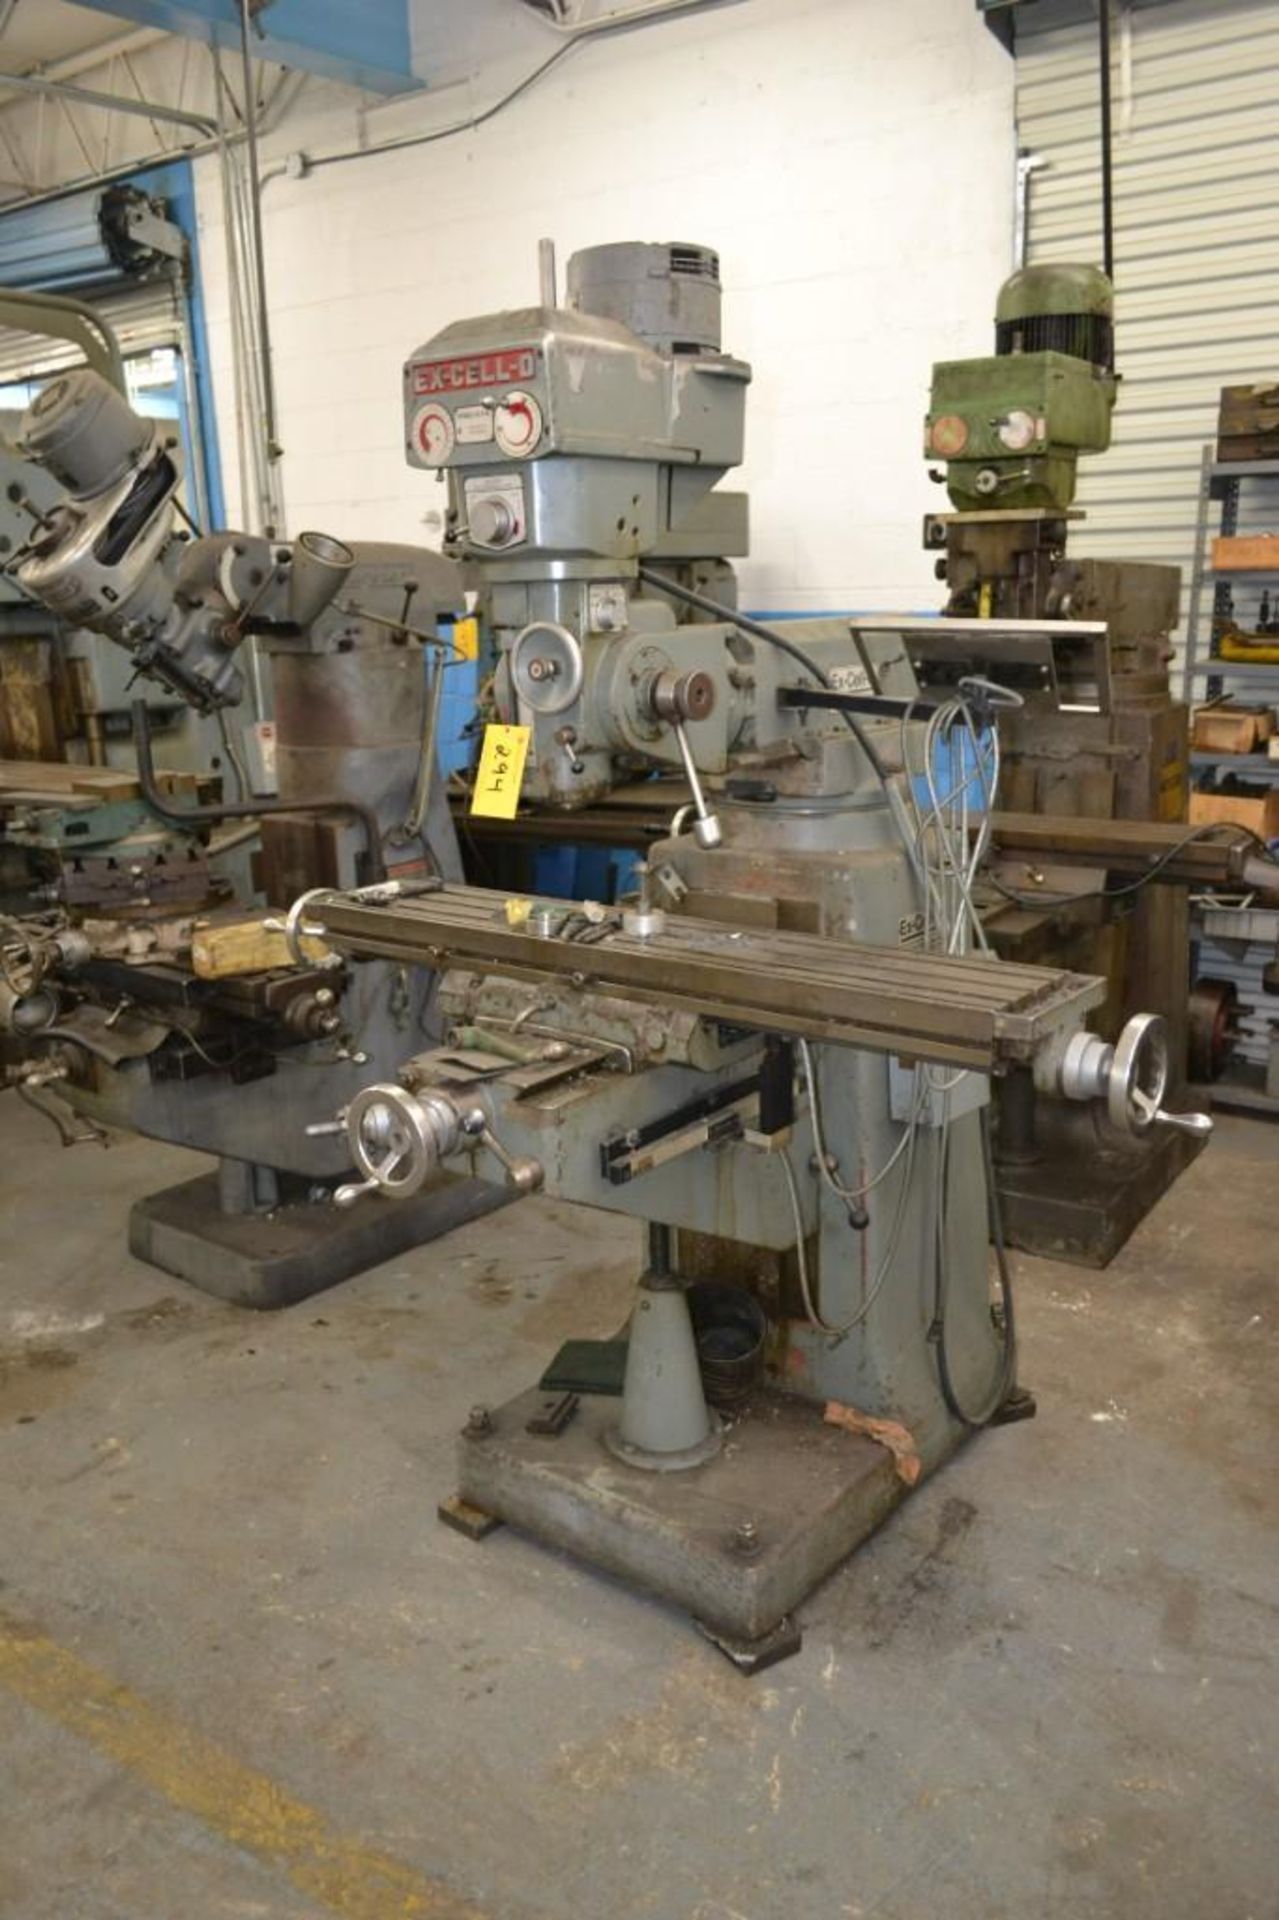 Ex-Cell-O Variable Speed Vertical Milling Machine Style 602, S/N 6029704, 85-4,000-RPM, 9" x 48" Pow - Image 8 of 8